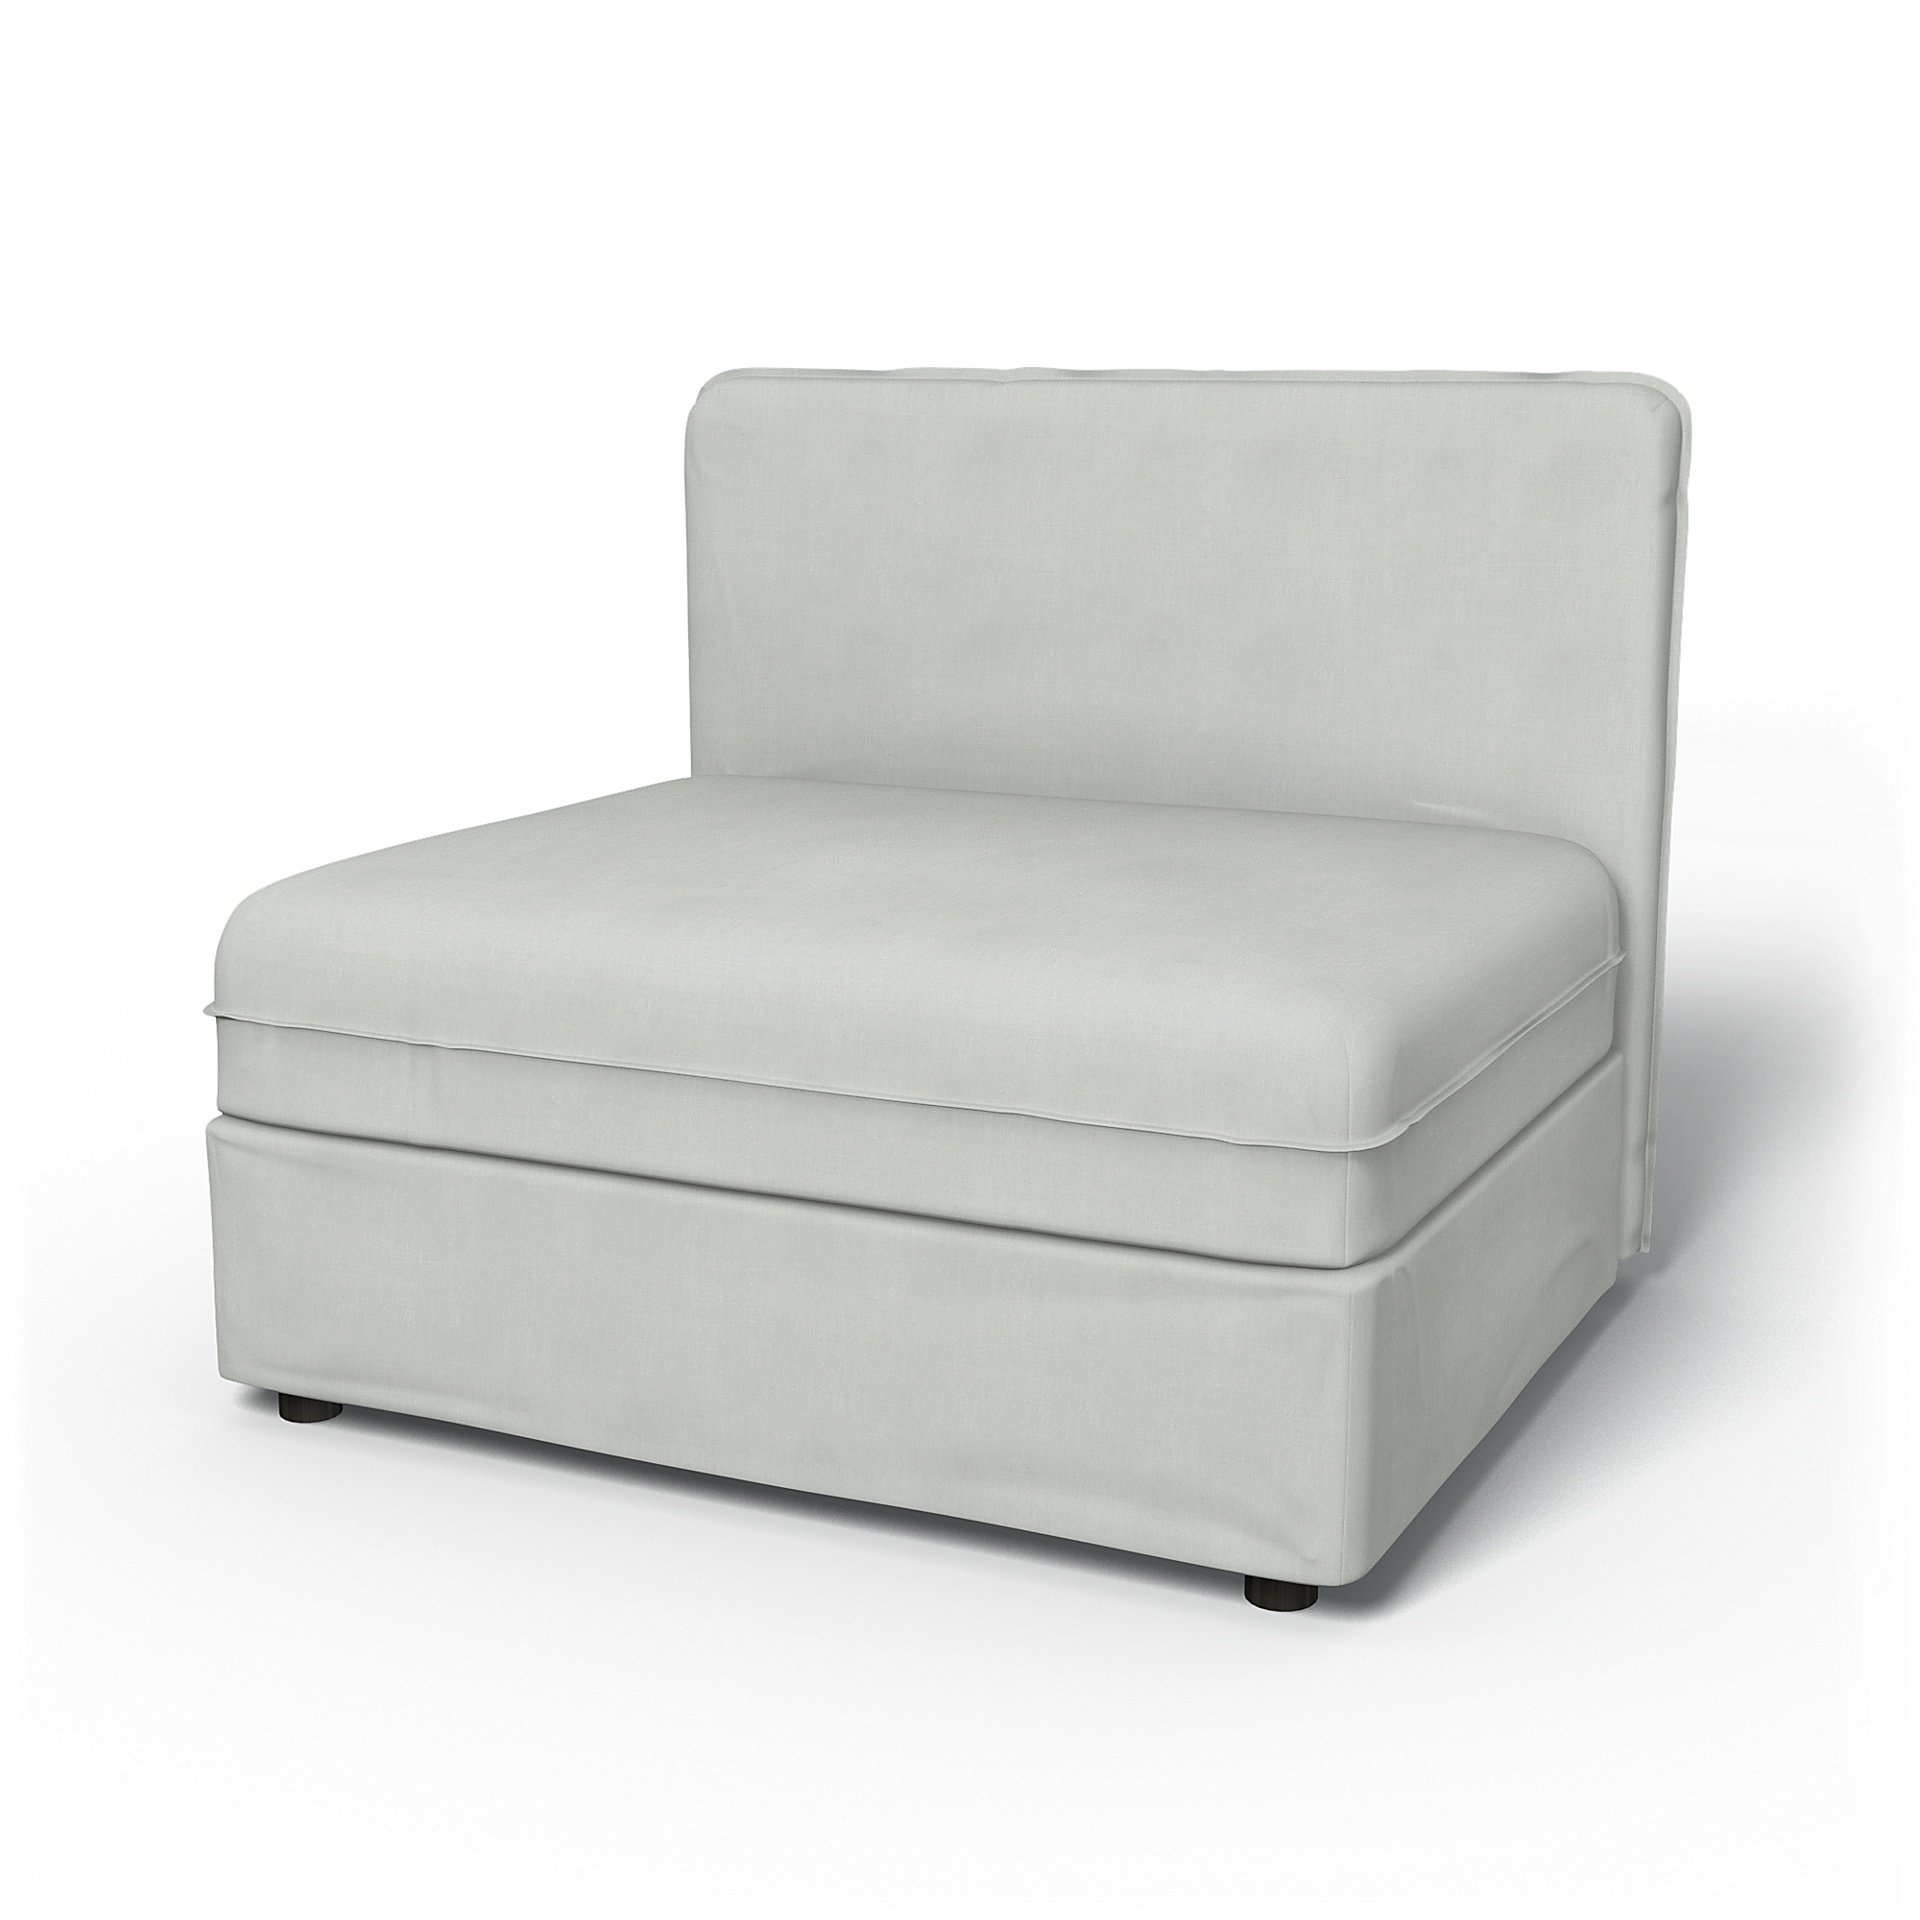 IKEA - Vallentuna Seat Module with Low Back Cover 100x80cm 39x32in, Silver Grey, Linen - Bemz